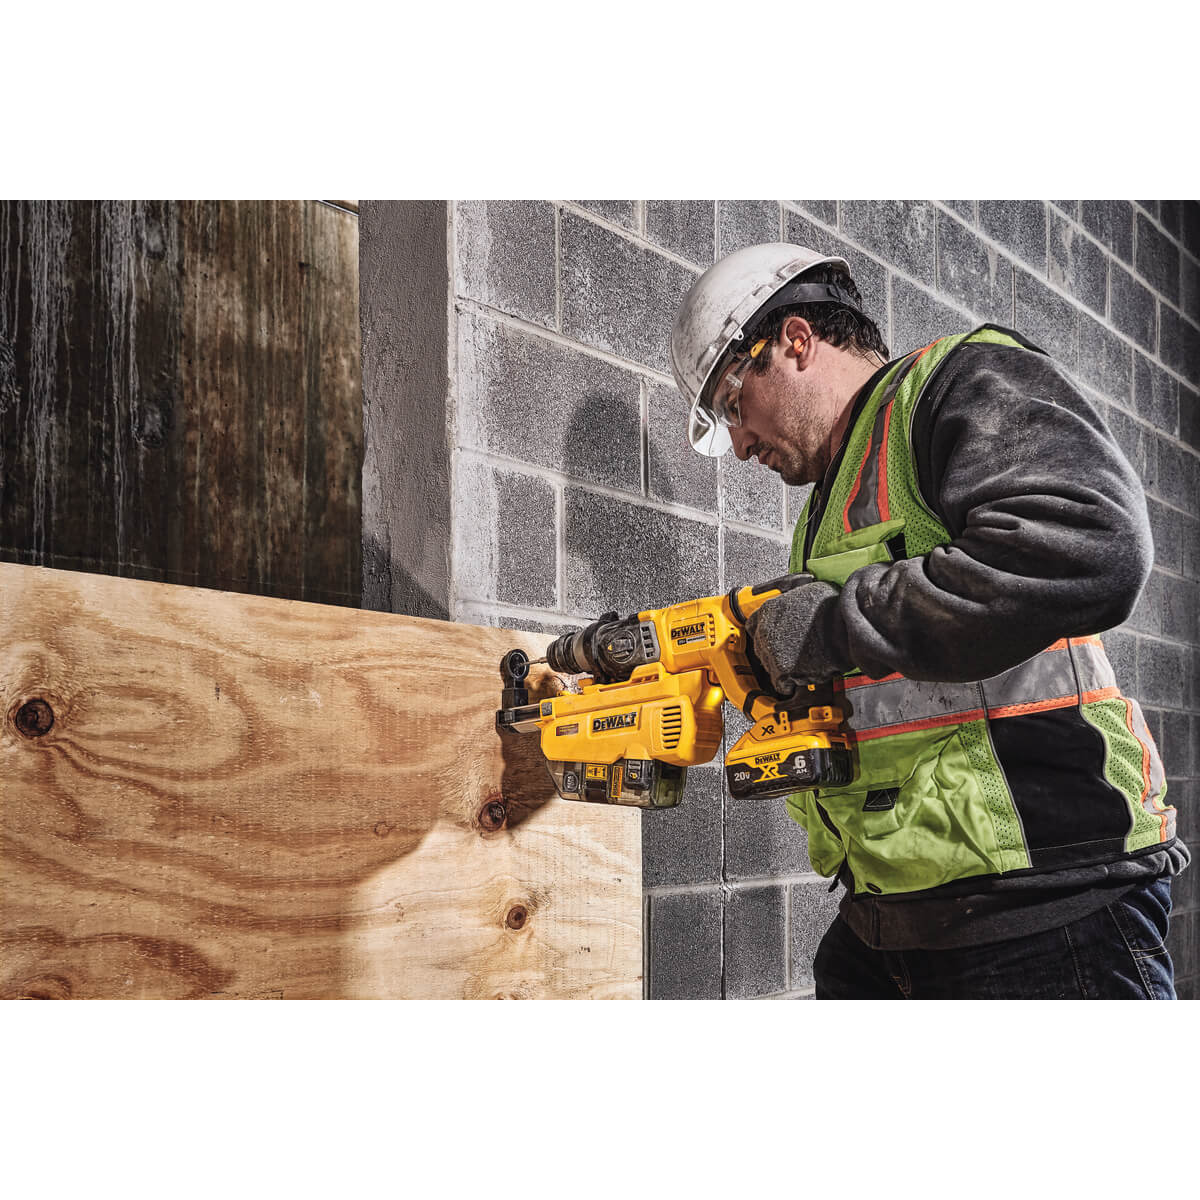 DEWALT DCH263R2 1-1/8 IN. SDS PLUS D-HANDLE ROTARY HAMMER KIT - wise-line-tools